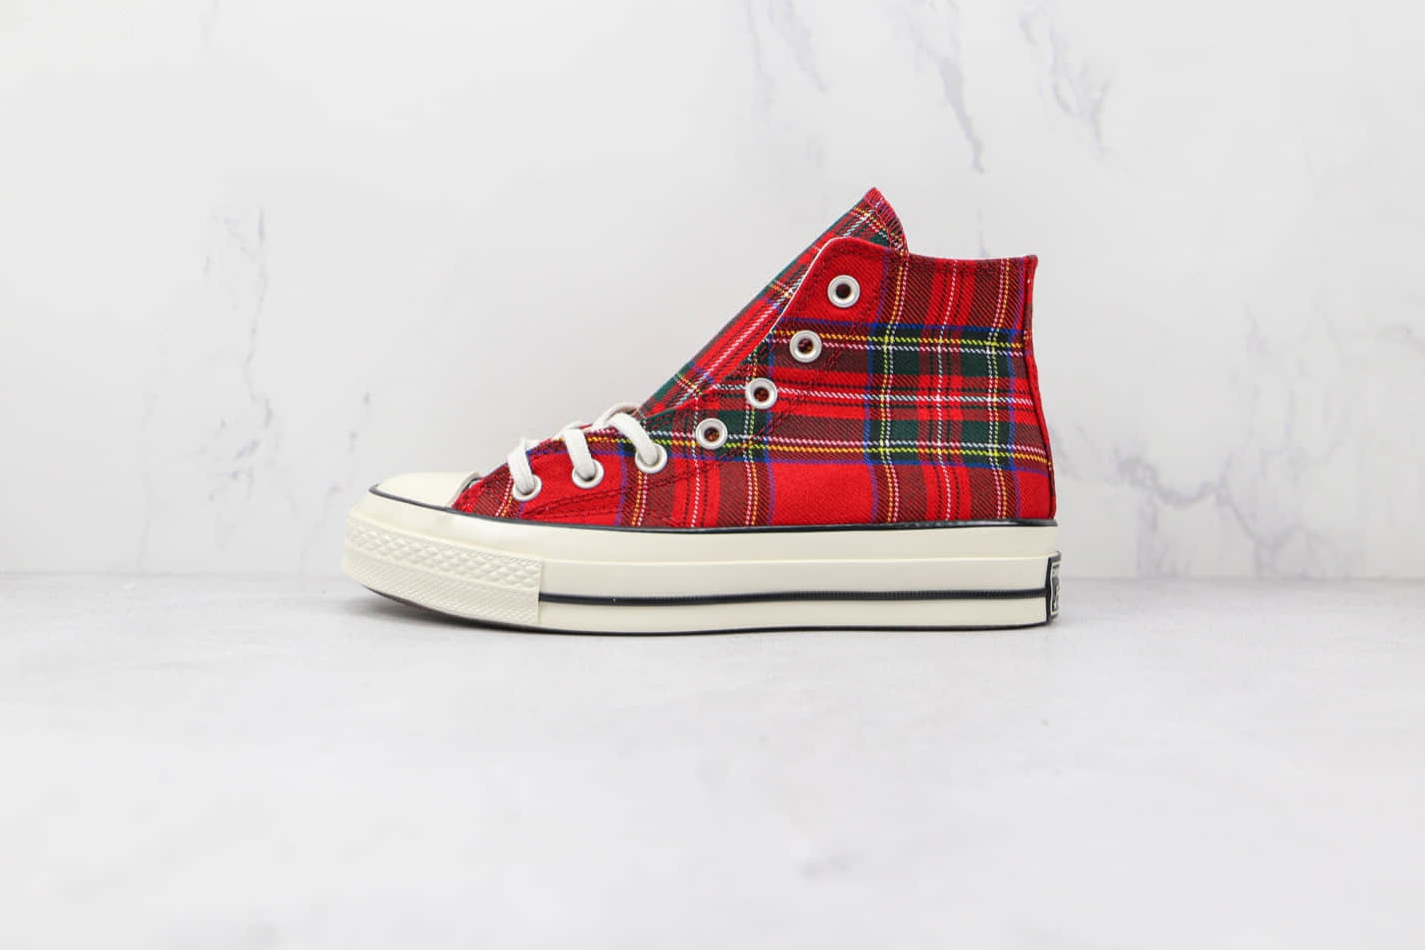 Converse Chuck Taylor All Star 70 Zip High Top Red White - Stylish and Classic Sneakers